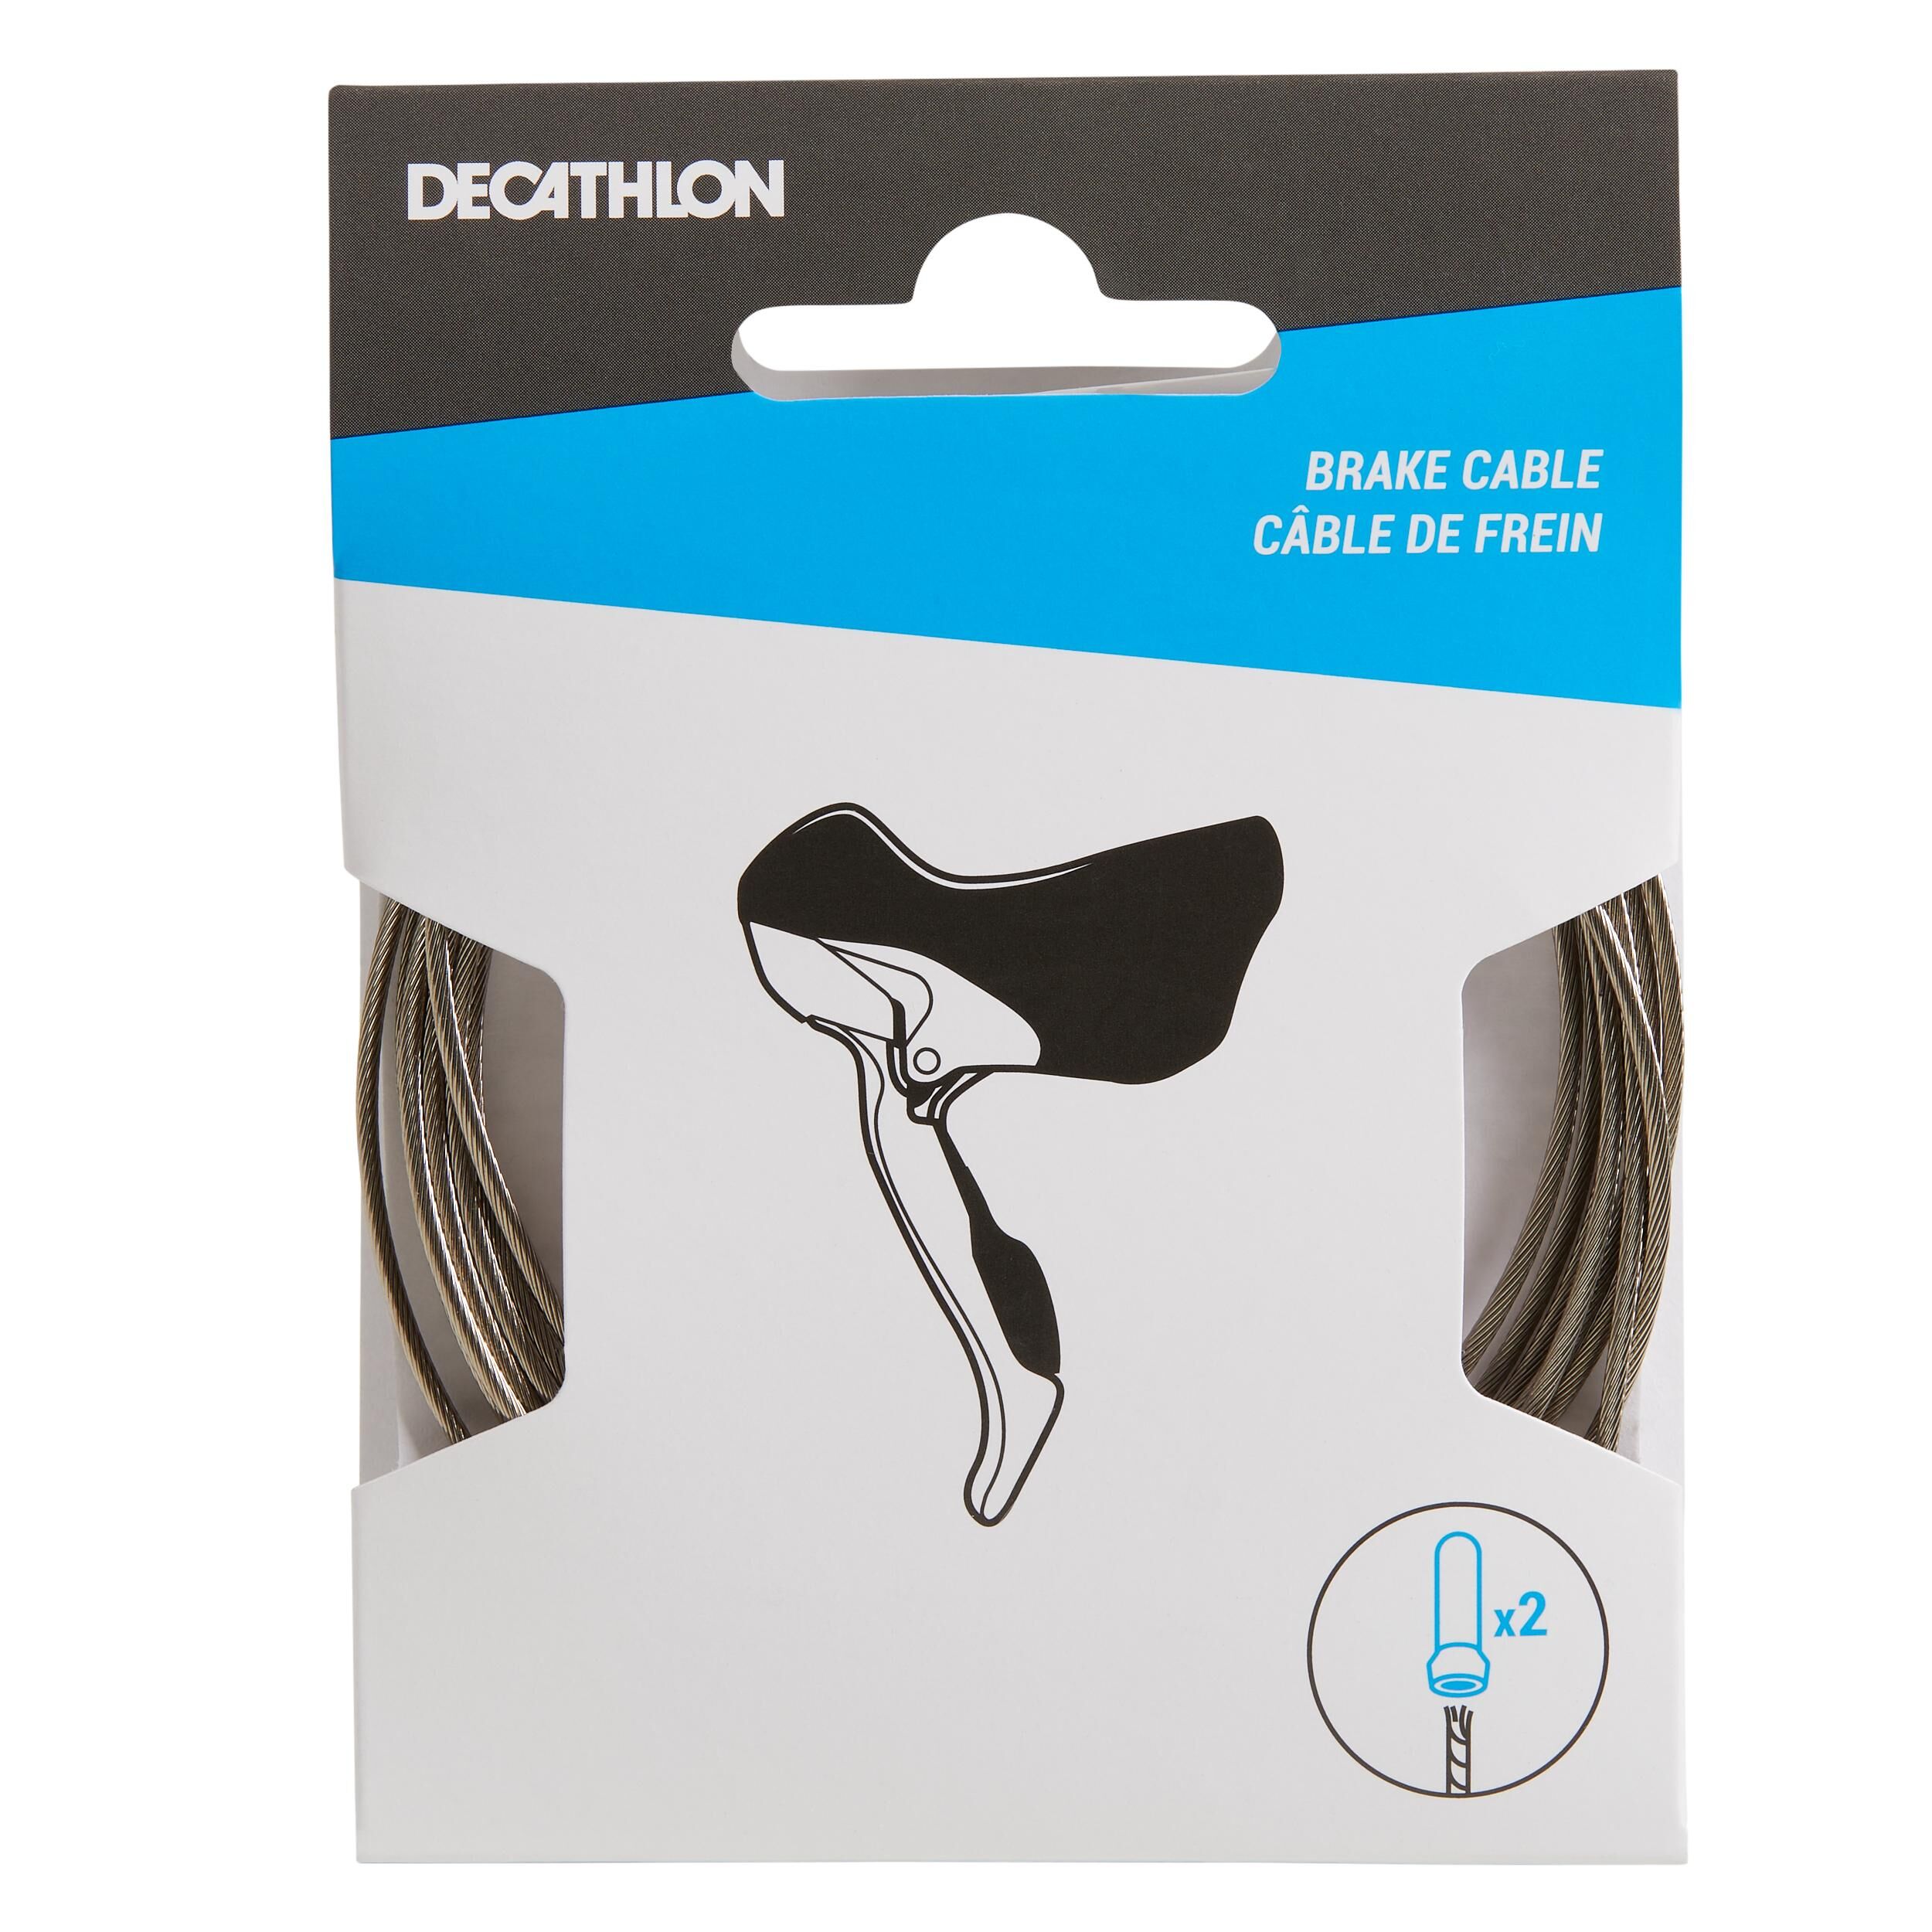 DECATHLON Universal Road Brake Cable - Stainless Steel